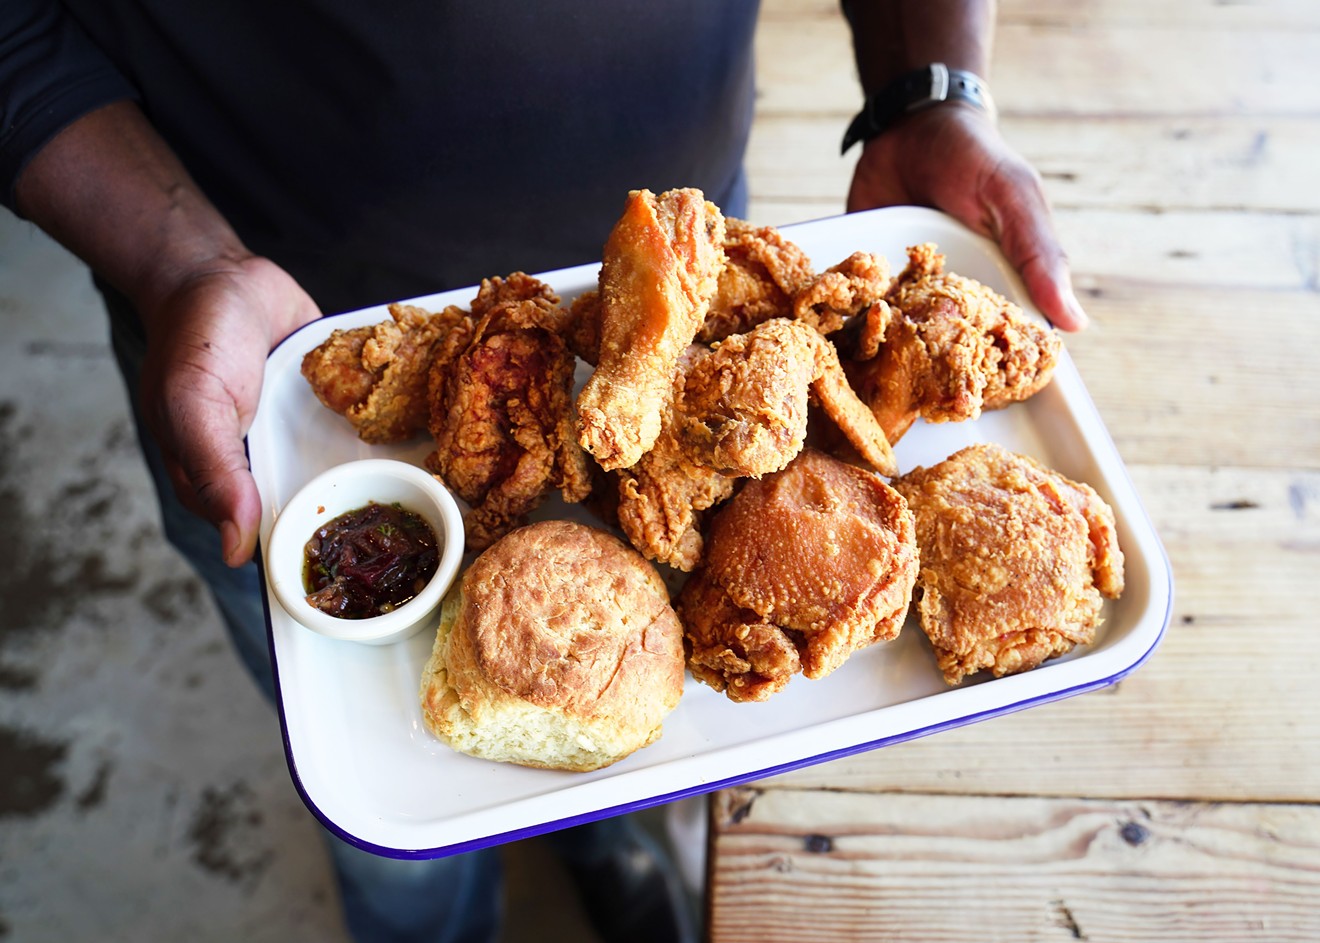 This pretty plate of delicious fried chicken is coming soon.